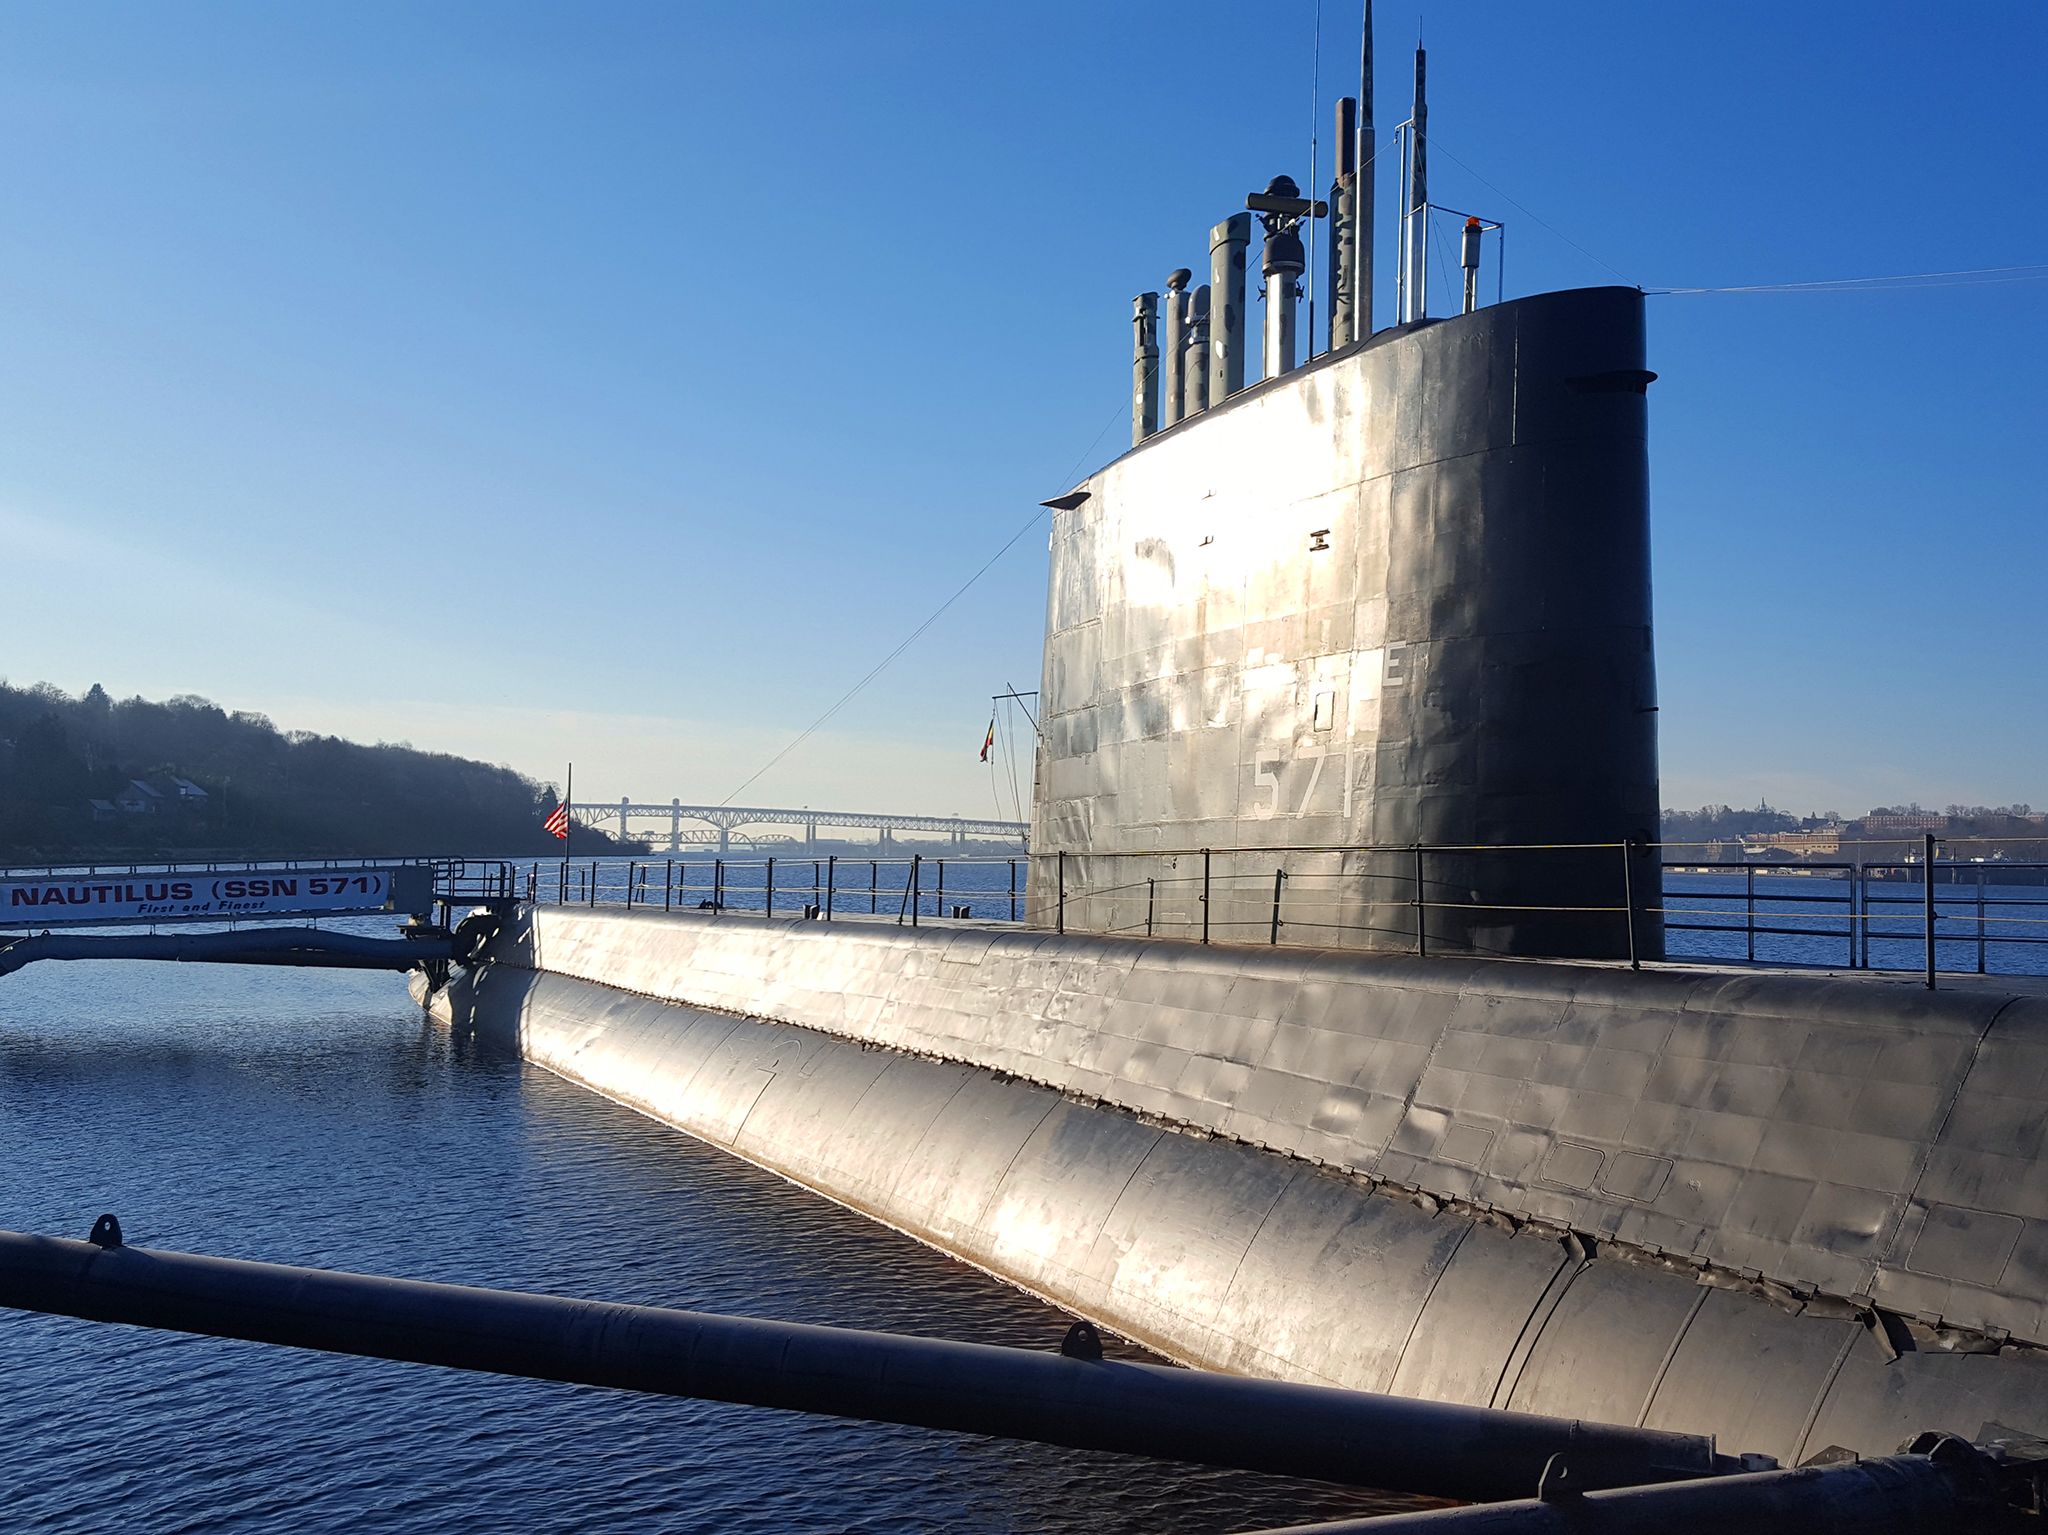 USS Nautilus:  the world's first nuclear-powered submarine.  This image is from Drain the Oceans. [Photo of the day - May 2020]